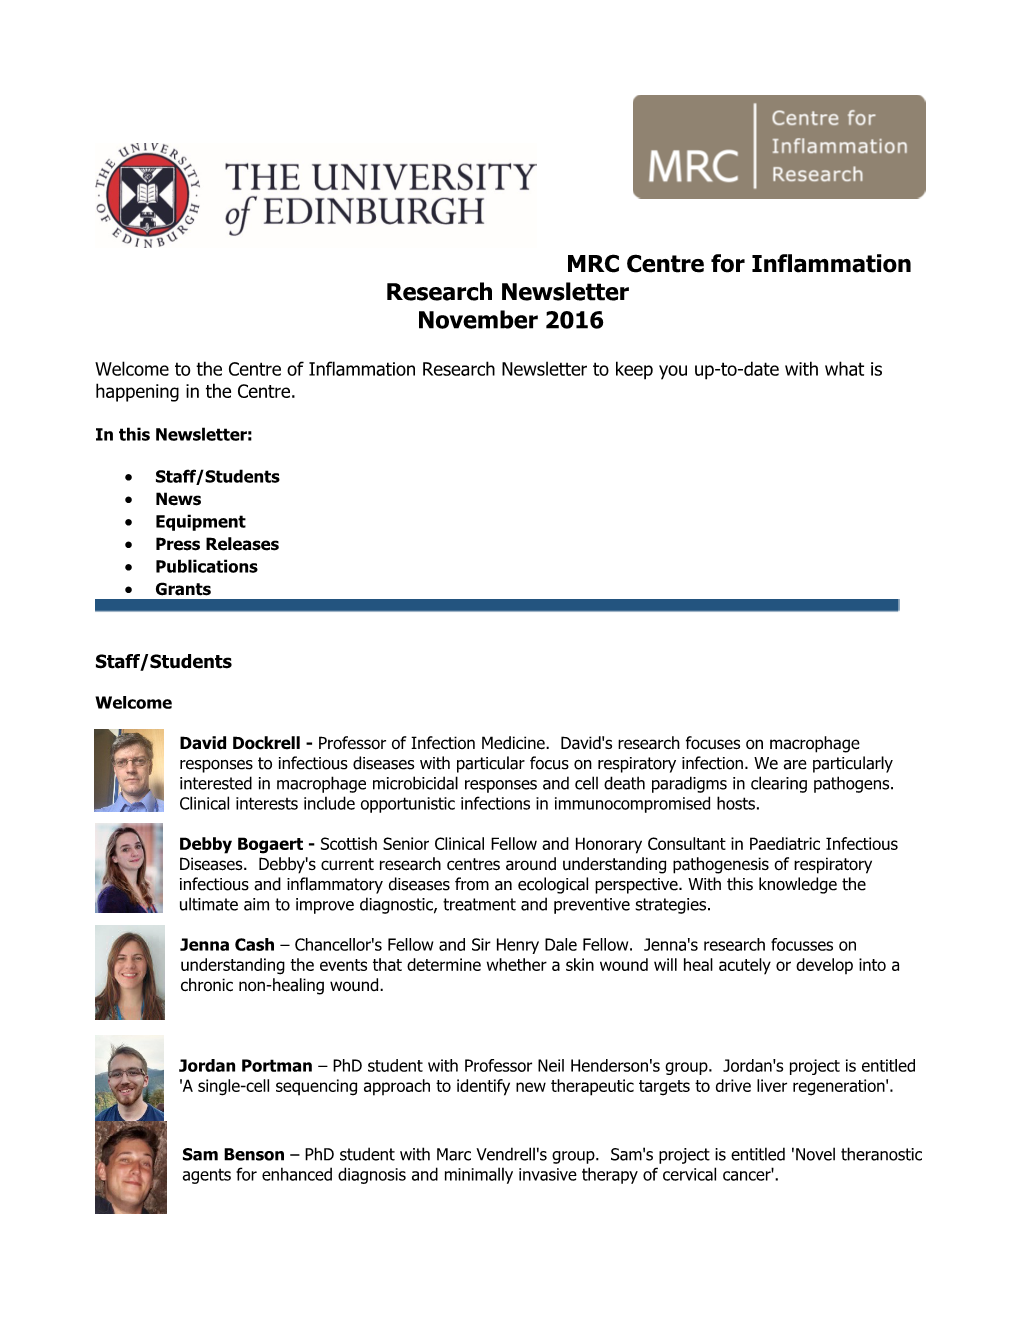 MRC Centre for Inflammation Research Newsletter